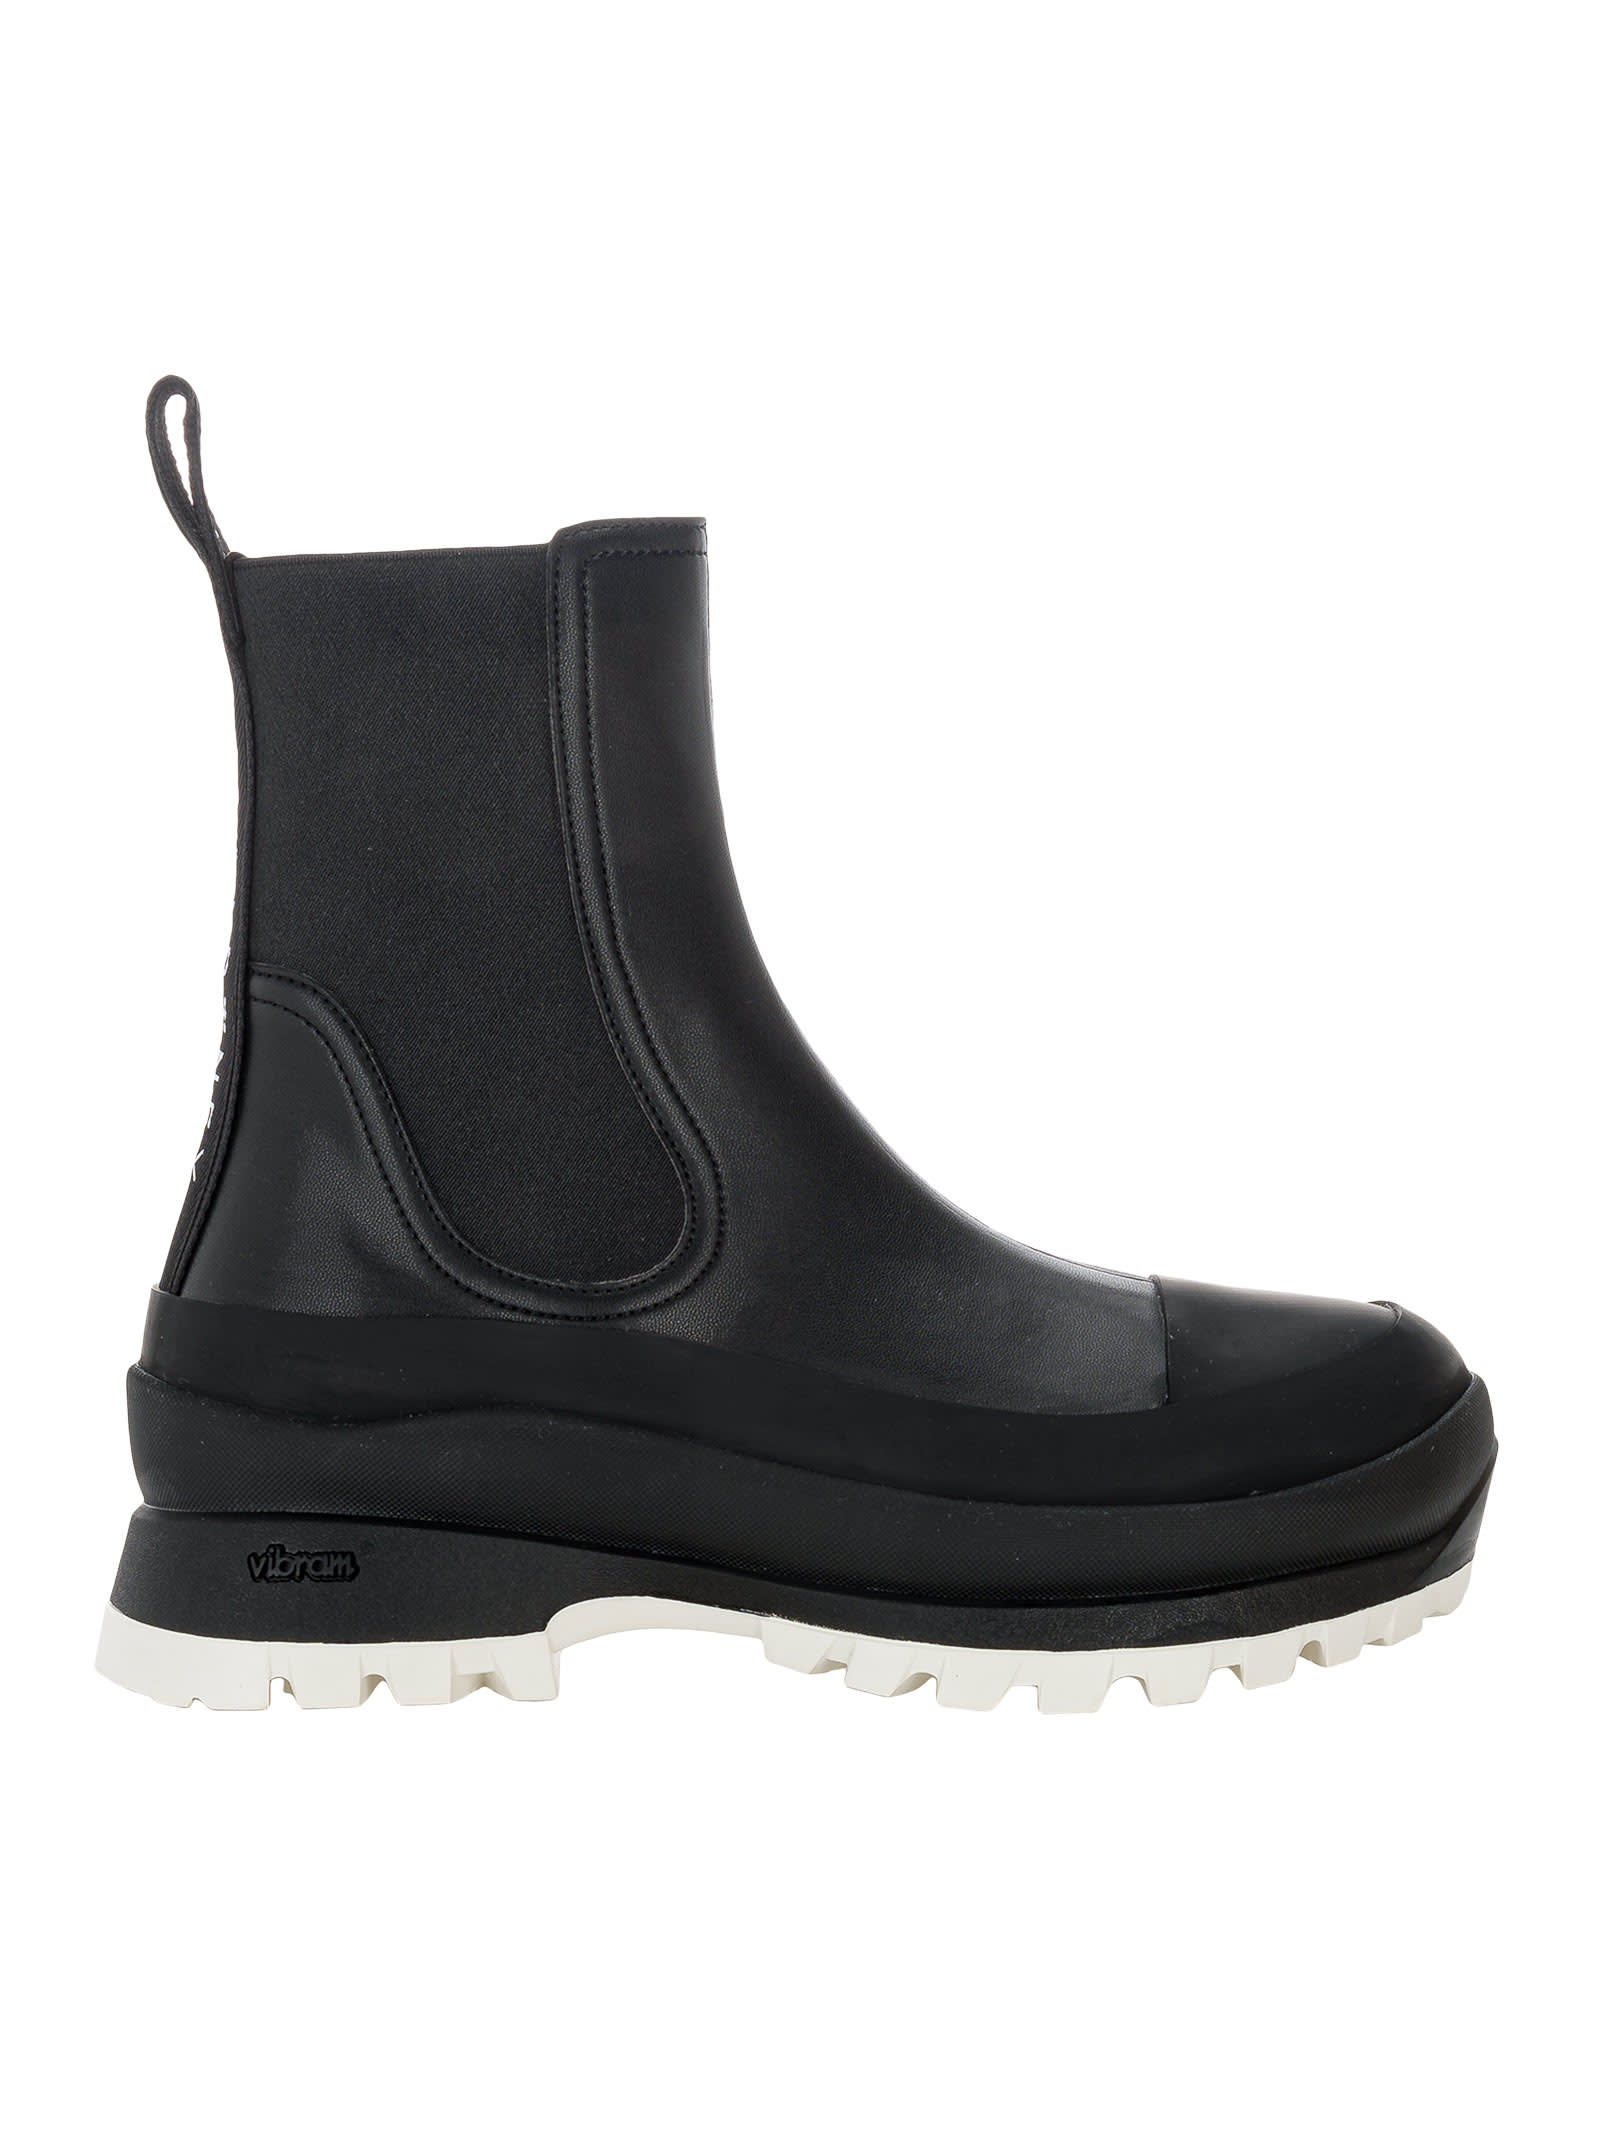 Buy Stella Mccartney Trace Boots online, shop Stella McCartney shoes with free shipping